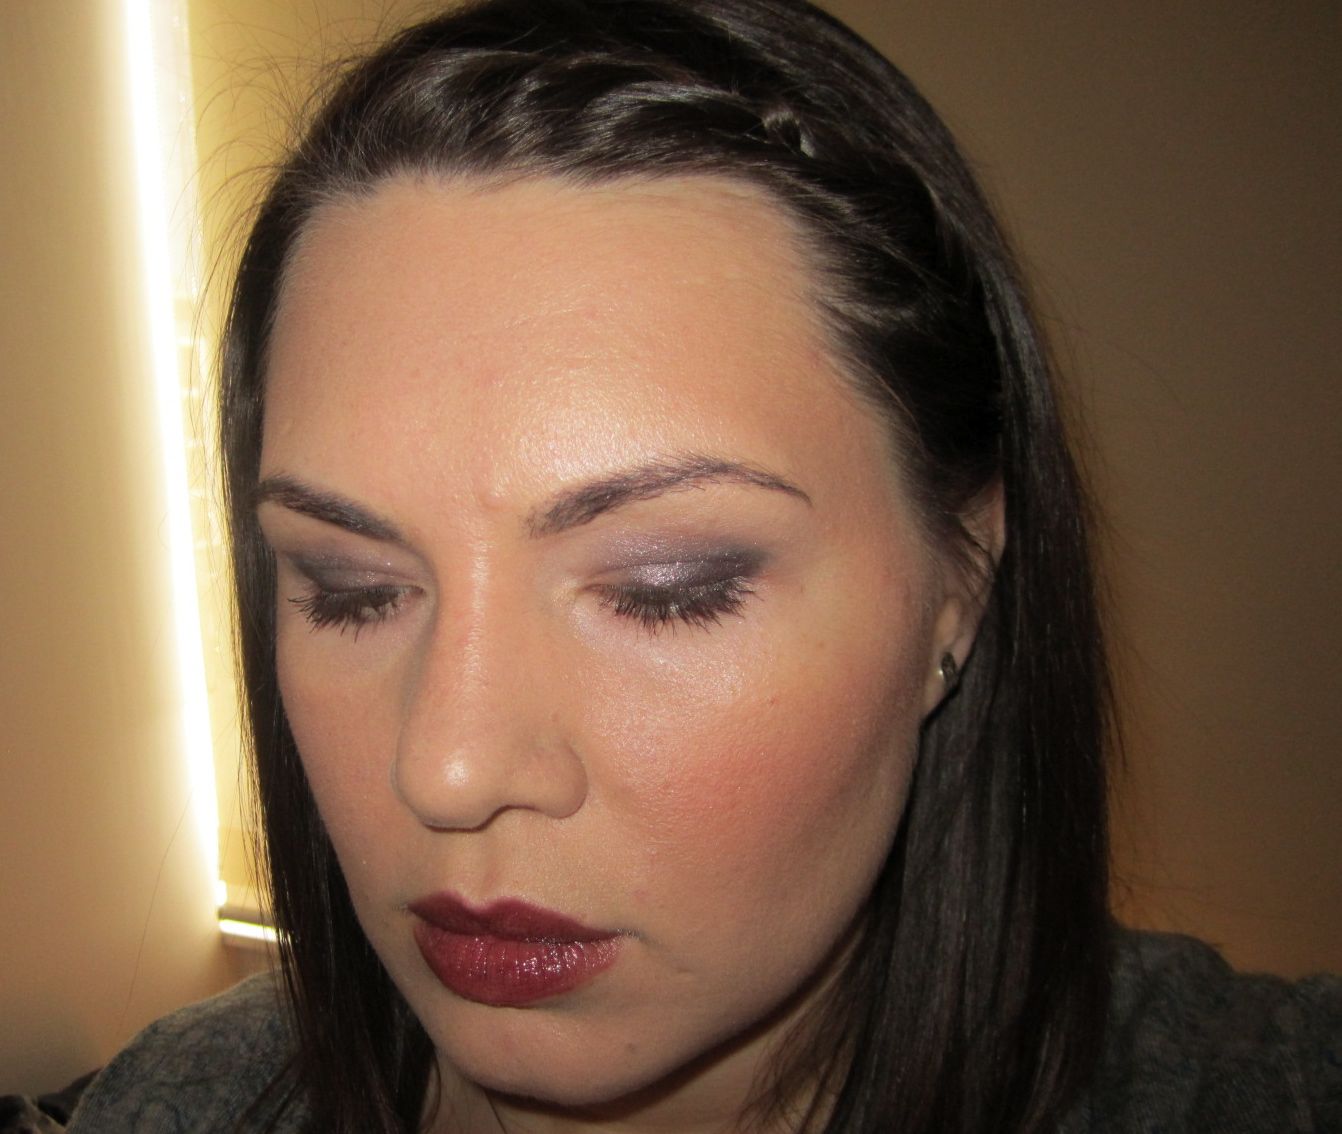 Chanel Illusion D'Ombre Eyeshadow in Ebloui Review